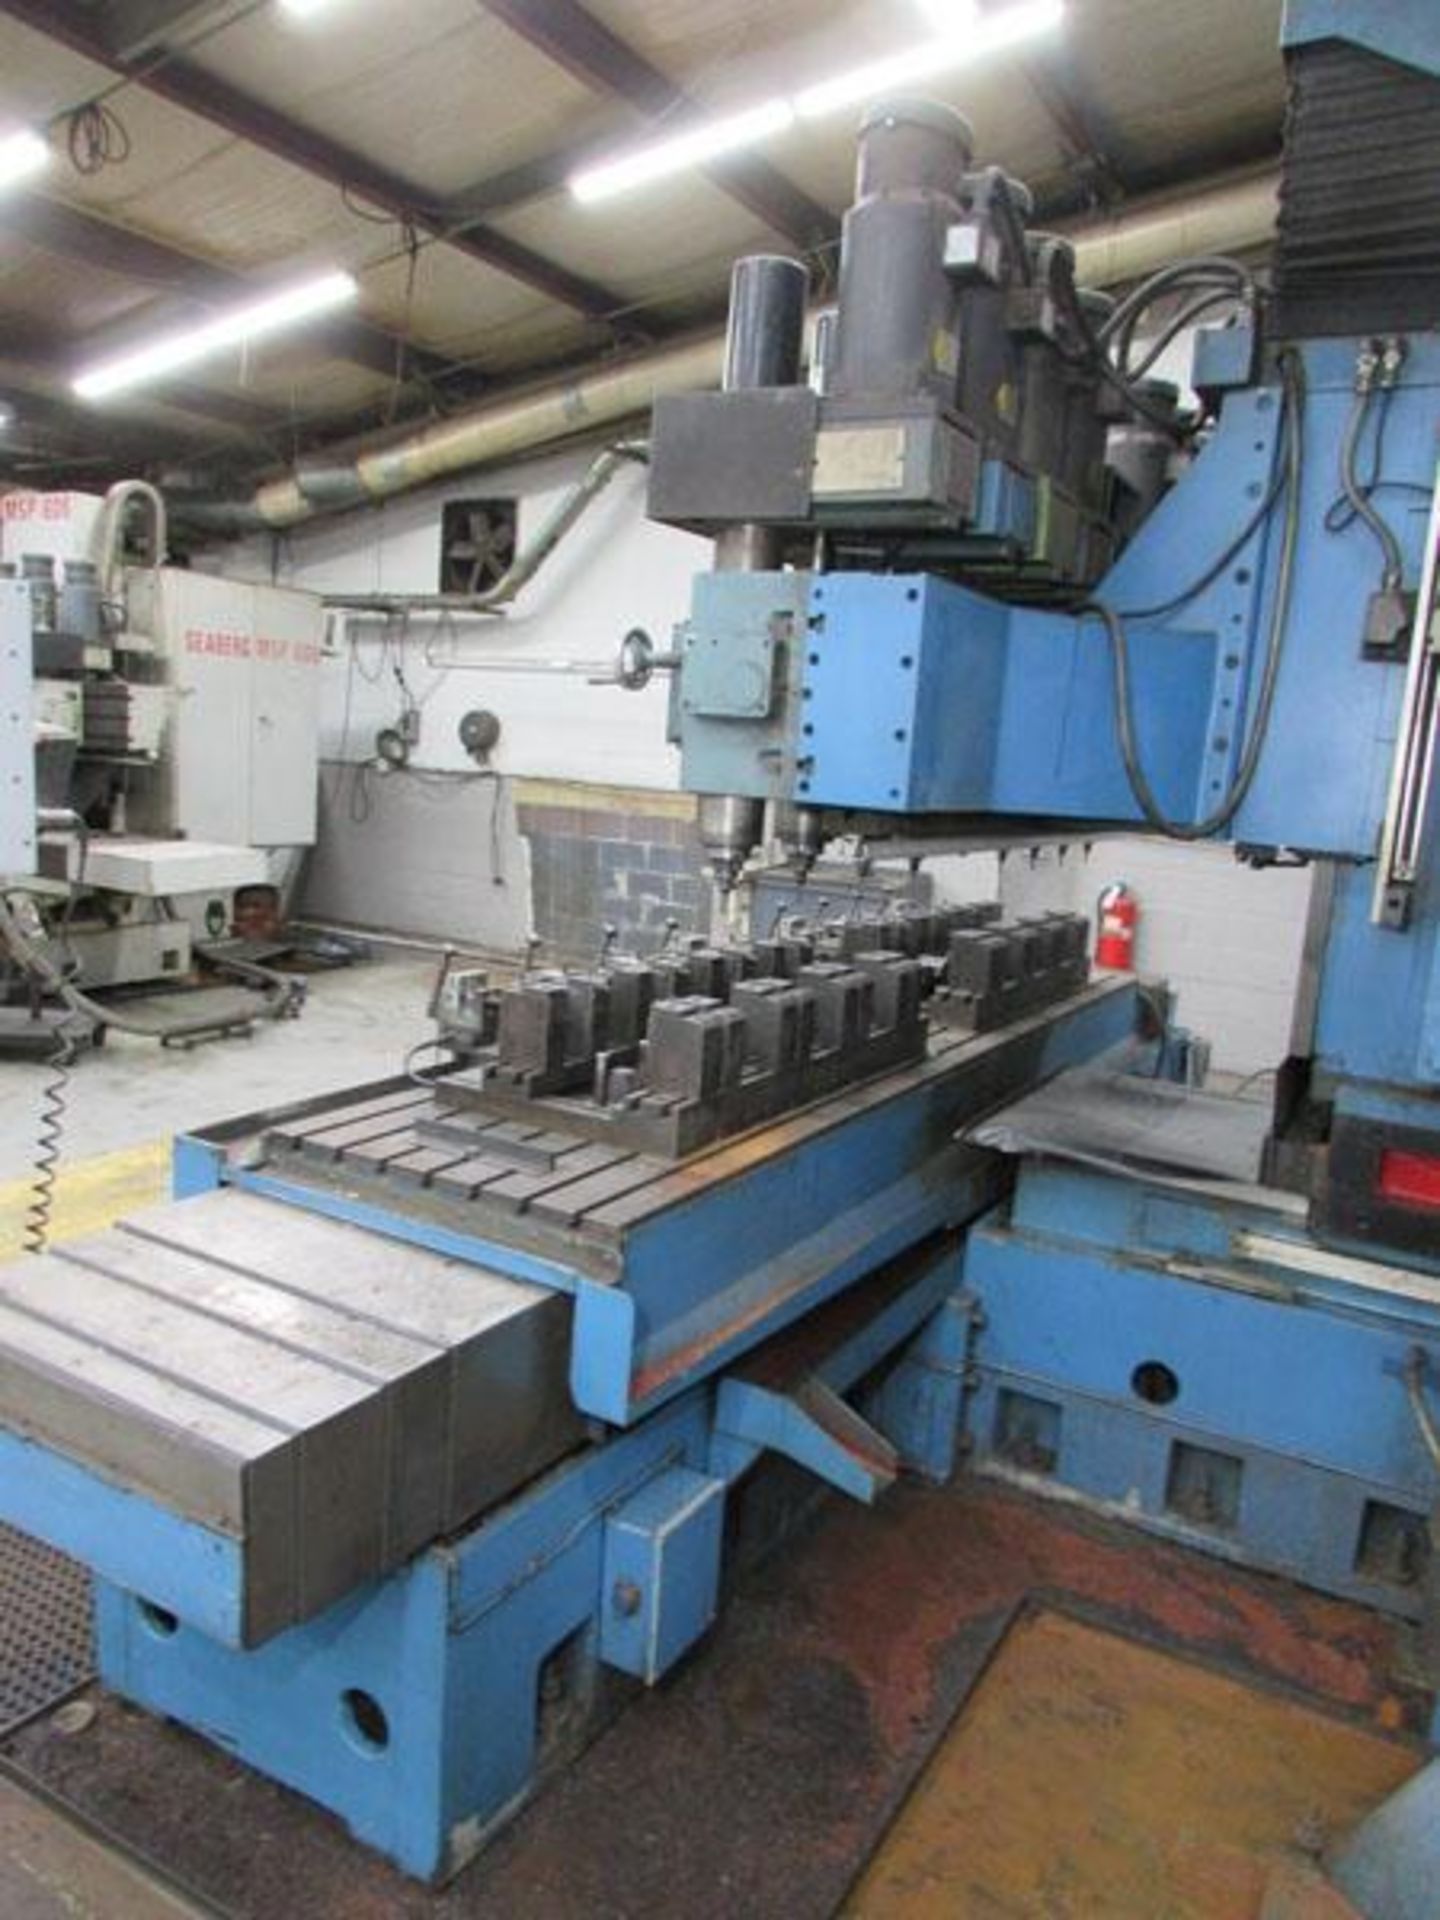 Seaberg MCP 750 8 Spindle CNC Vertical Milling Machine - Image 12 of 20